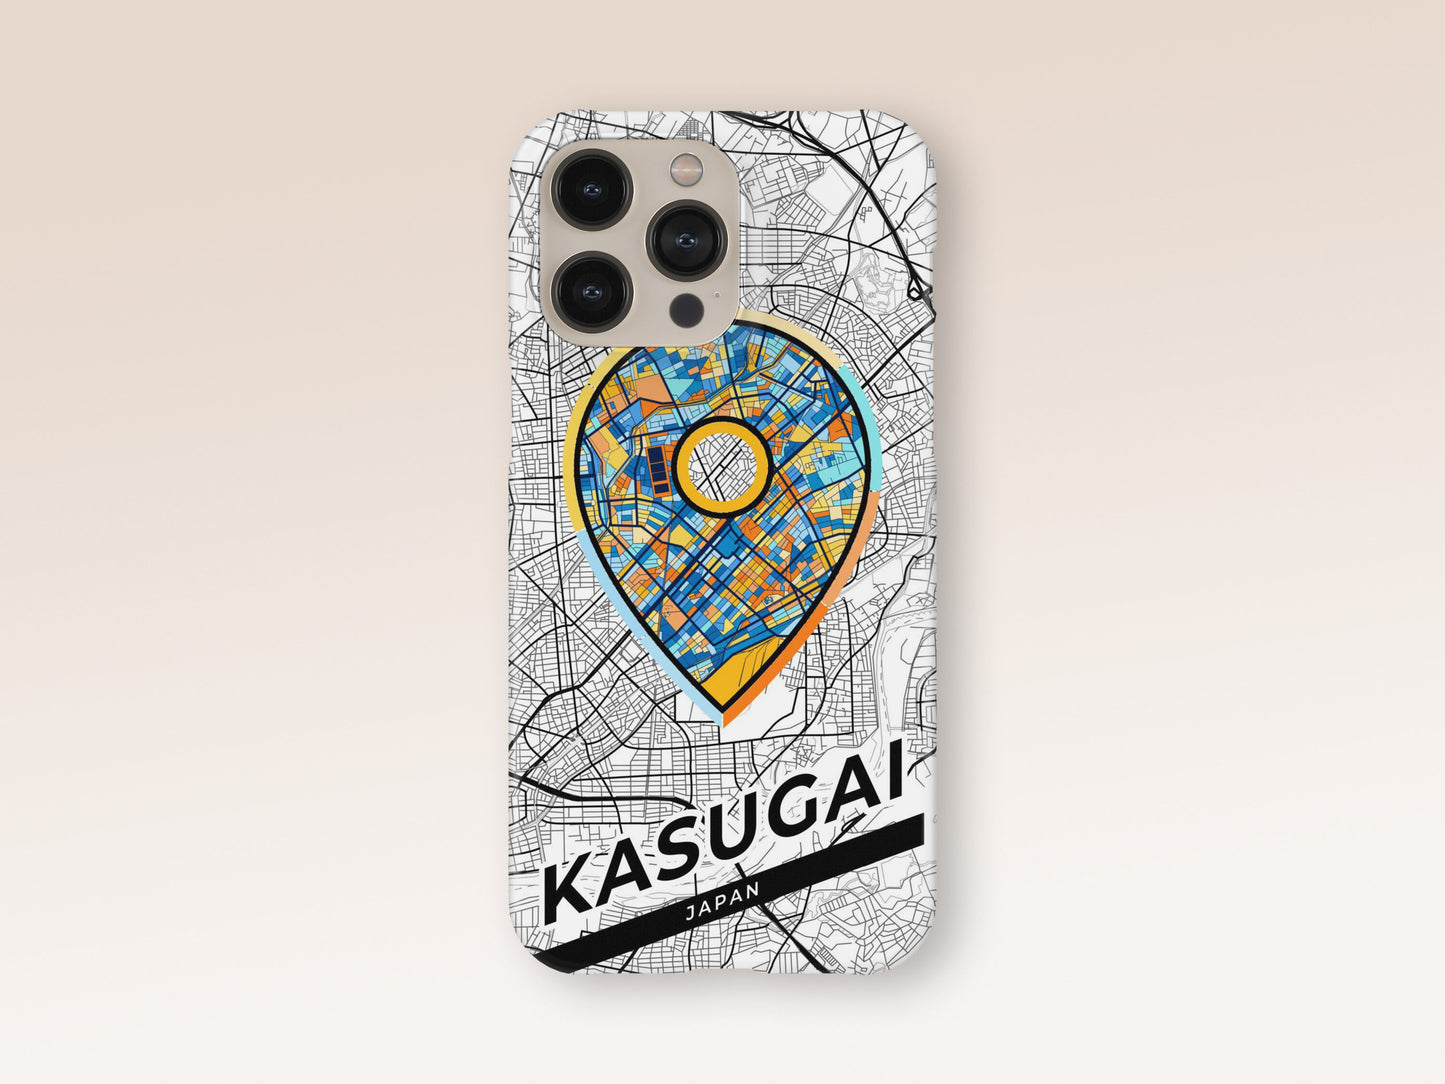 Kasugai Japan slim phone case with colorful icon. Birthday, wedding or housewarming gift. Couple match cases. 1